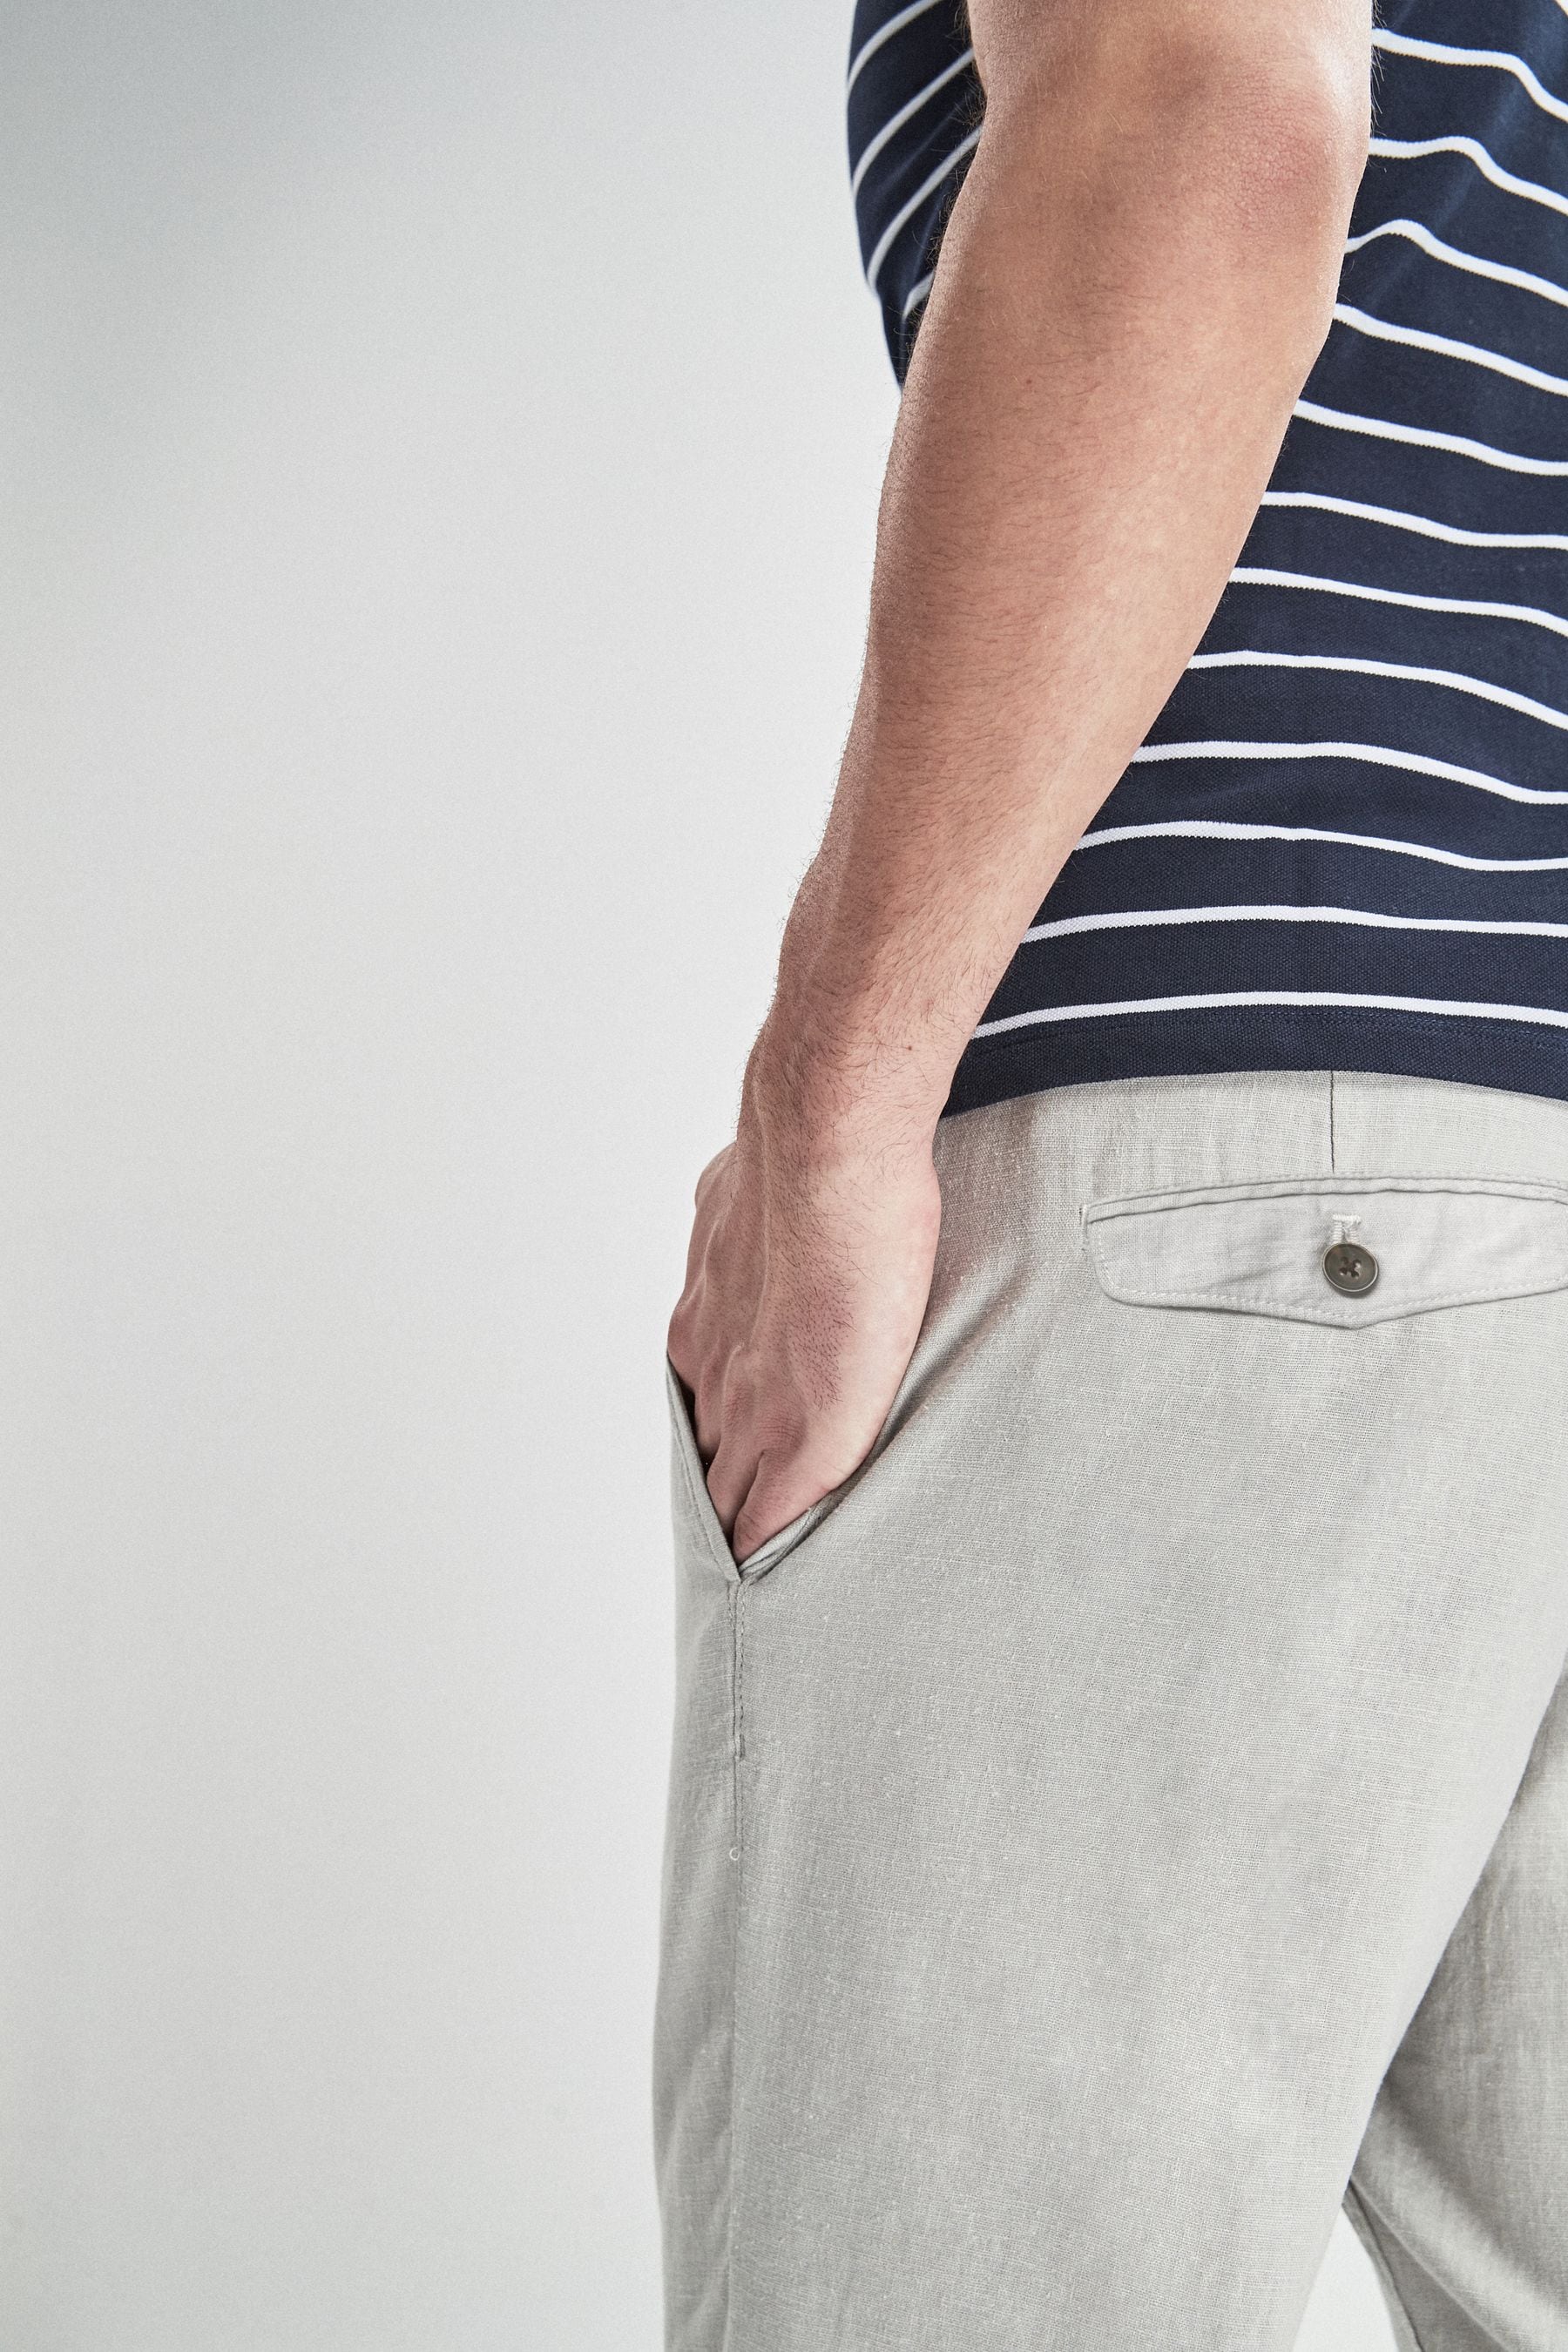 Buy Light Grey Linen Blend Drawstring Trousers from the Next UK online shop